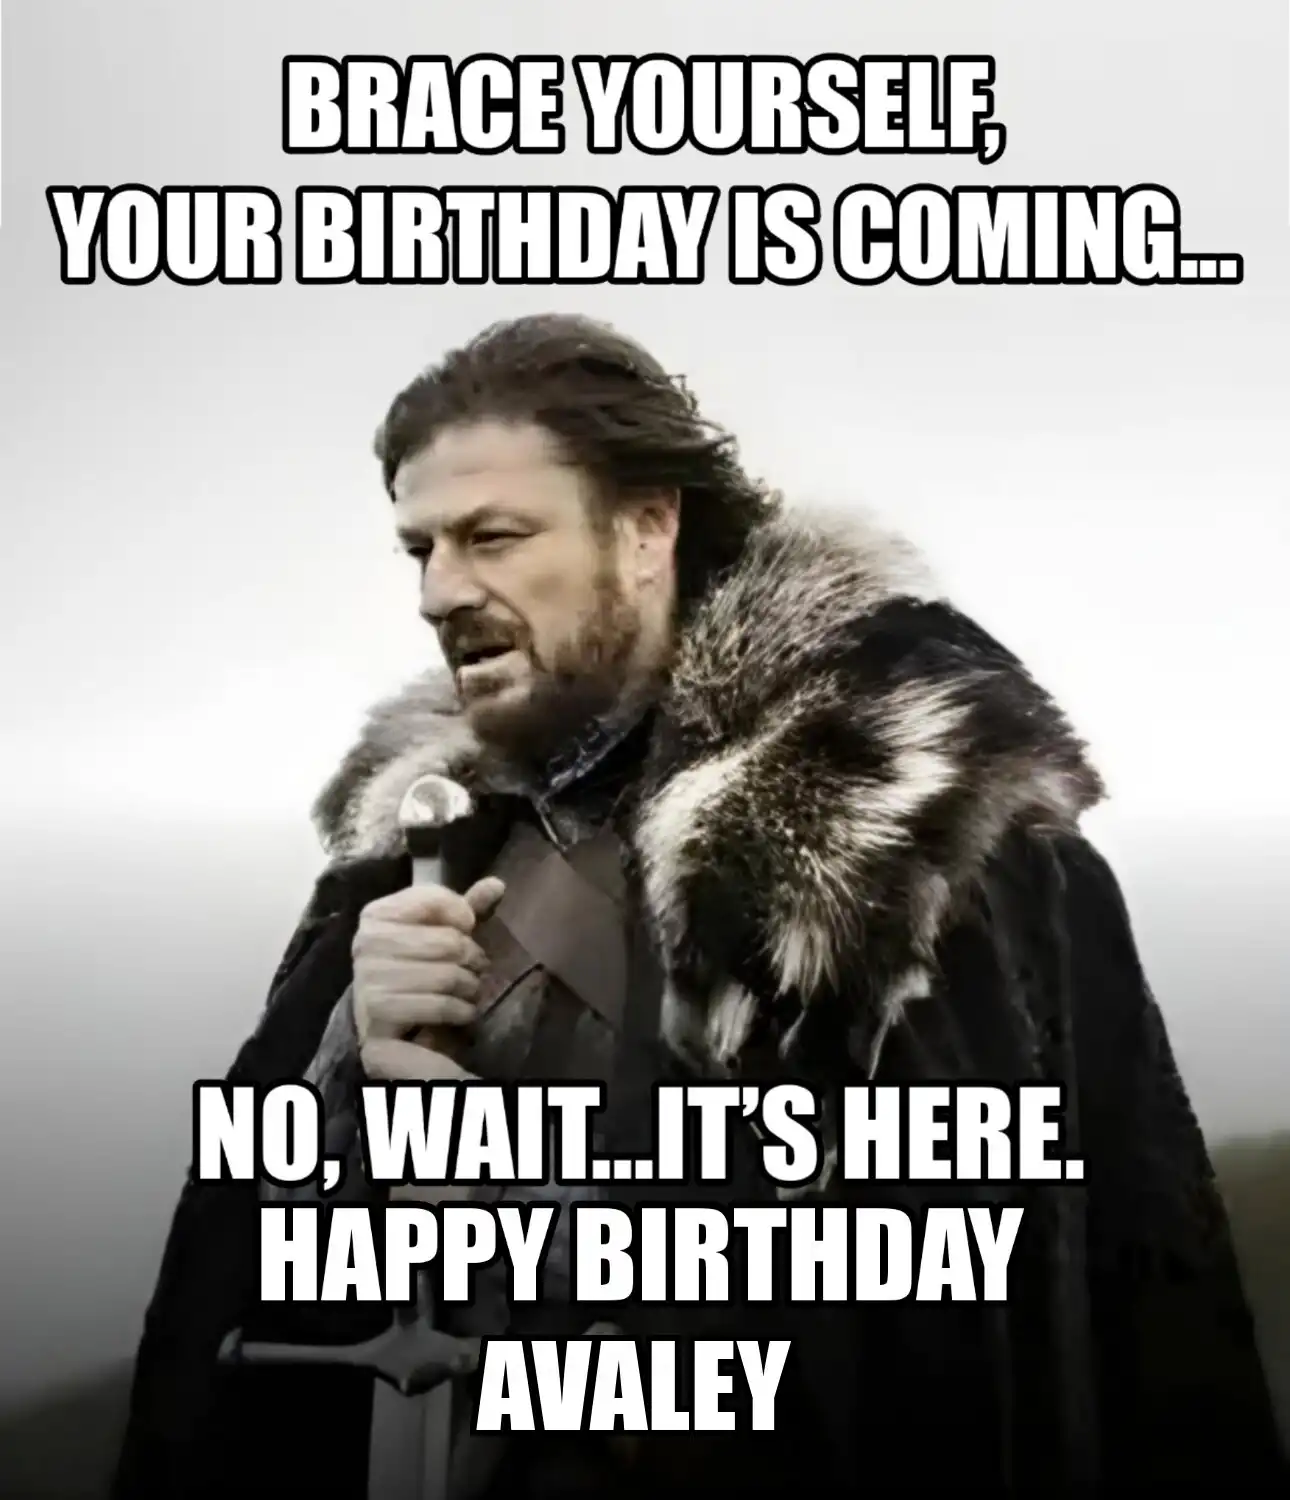 Happy Birthday Avaley Brace Yourself Your Birthday Is Coming Meme